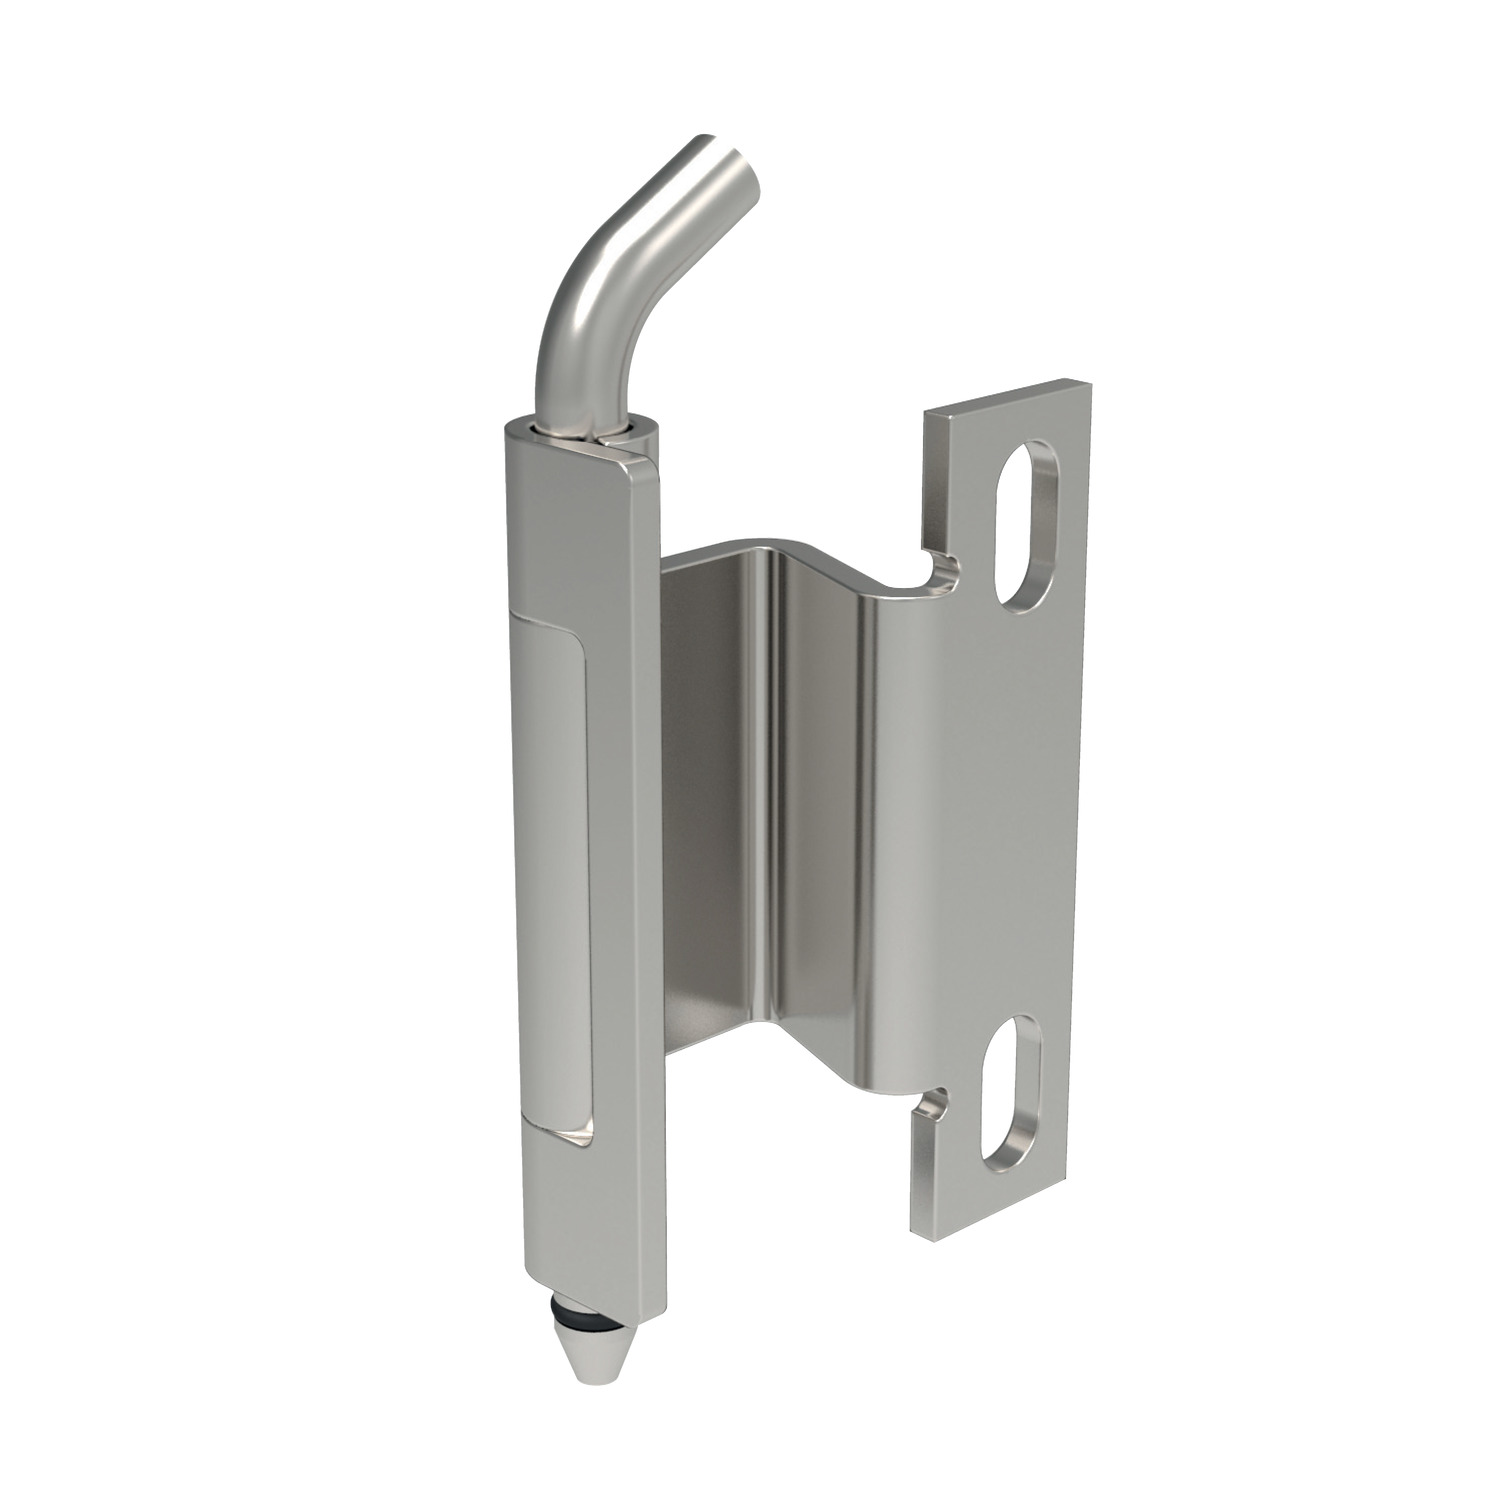 S2121 - Concealed Pivot Hinges - Lift Off